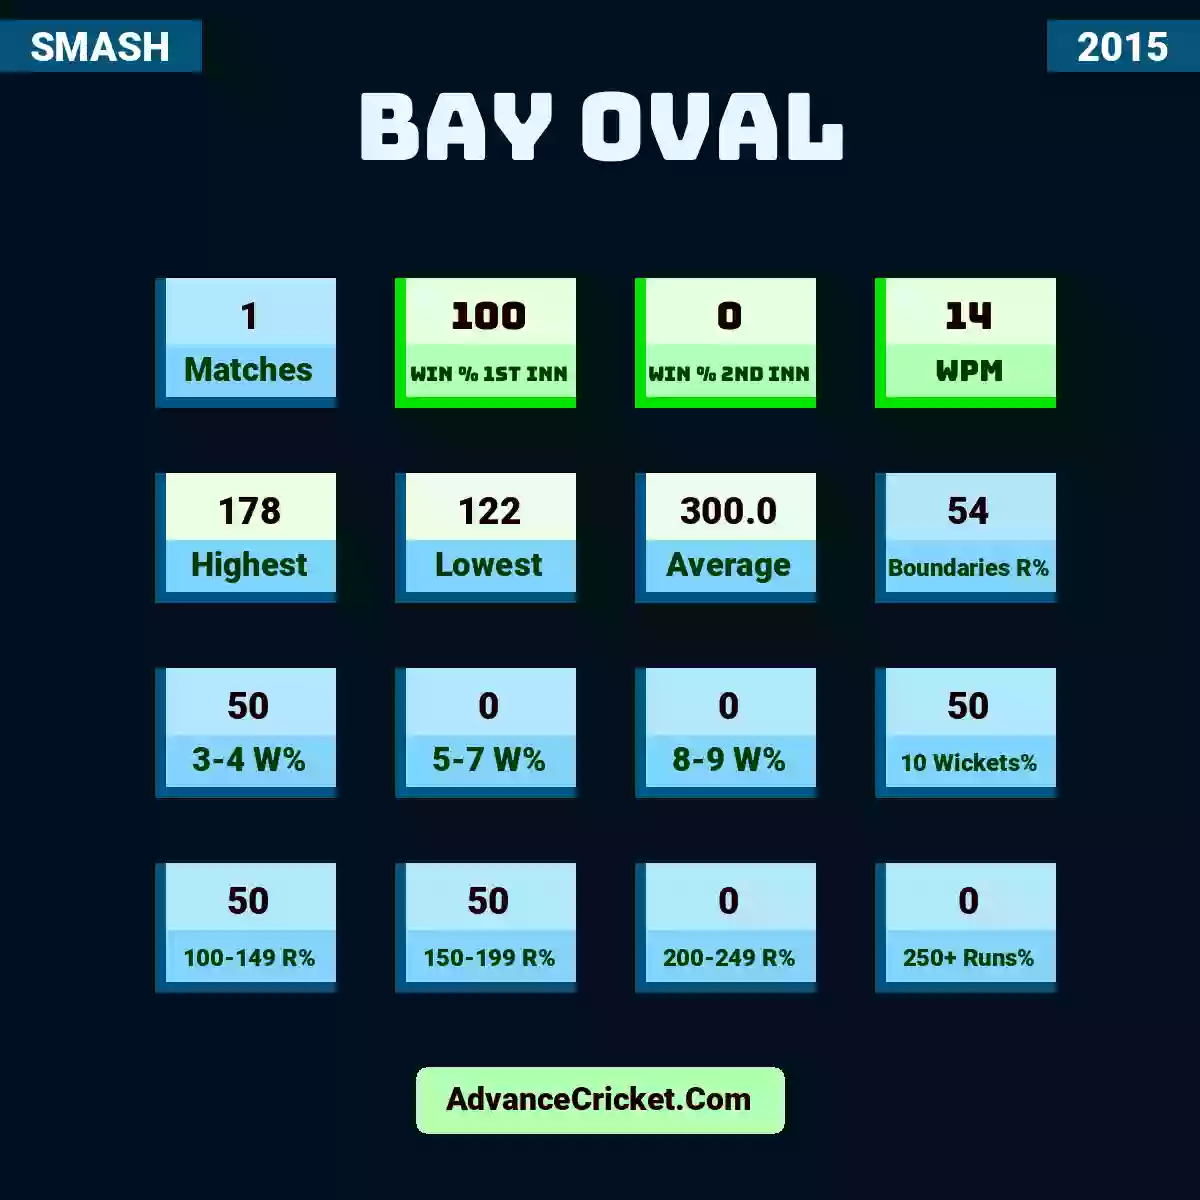 Image showing Bay Oval with Matches: 1, Win % 1st Inn: 100, Win % 2nd Inn: 0, WPM: 14, Highest: 178, Lowest: 122, Average: 300.0, Boundaries R%: 54, 3-4 W%: 50, 5-7 W%: 0, 8-9 W%: 0, 10 Wickets%: 50, 100-149 R%: 50, 150-199 R%: 50, 200-249 R%: 0, 250+ Runs%: 0.